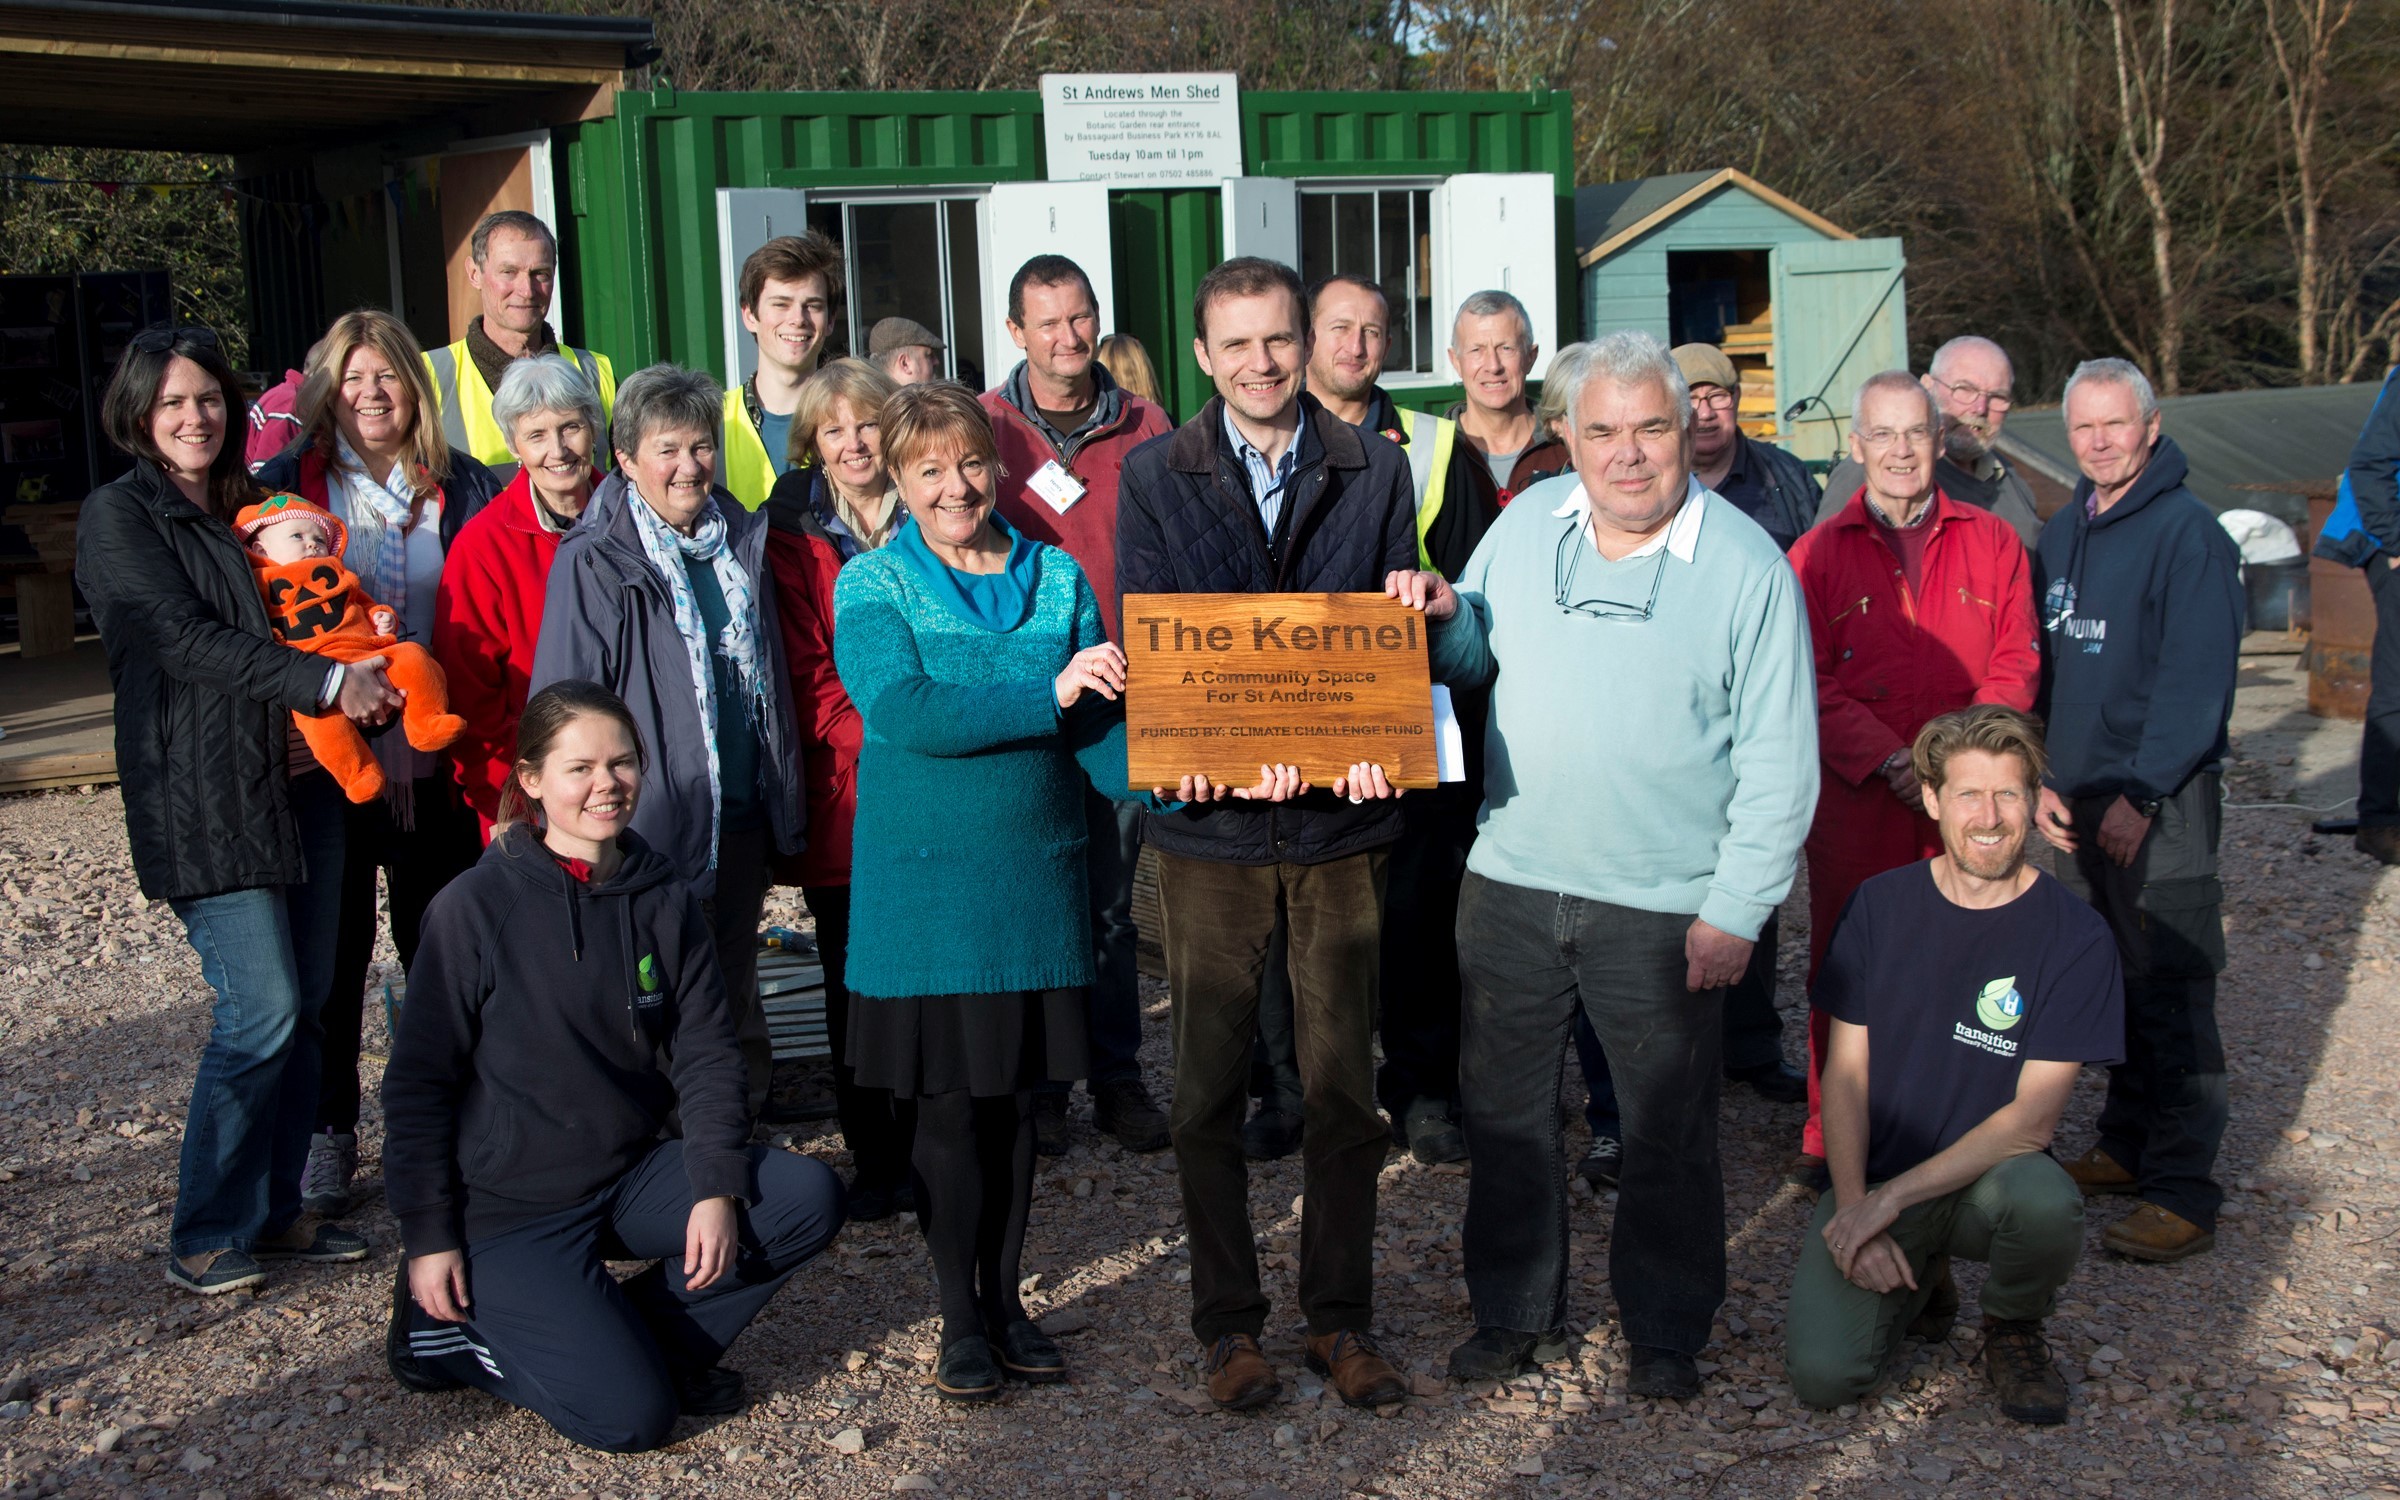 Members of all the groups involved with developing the new Kernel space at the St Andrews Botanic Garden with Stephen Gethins MP